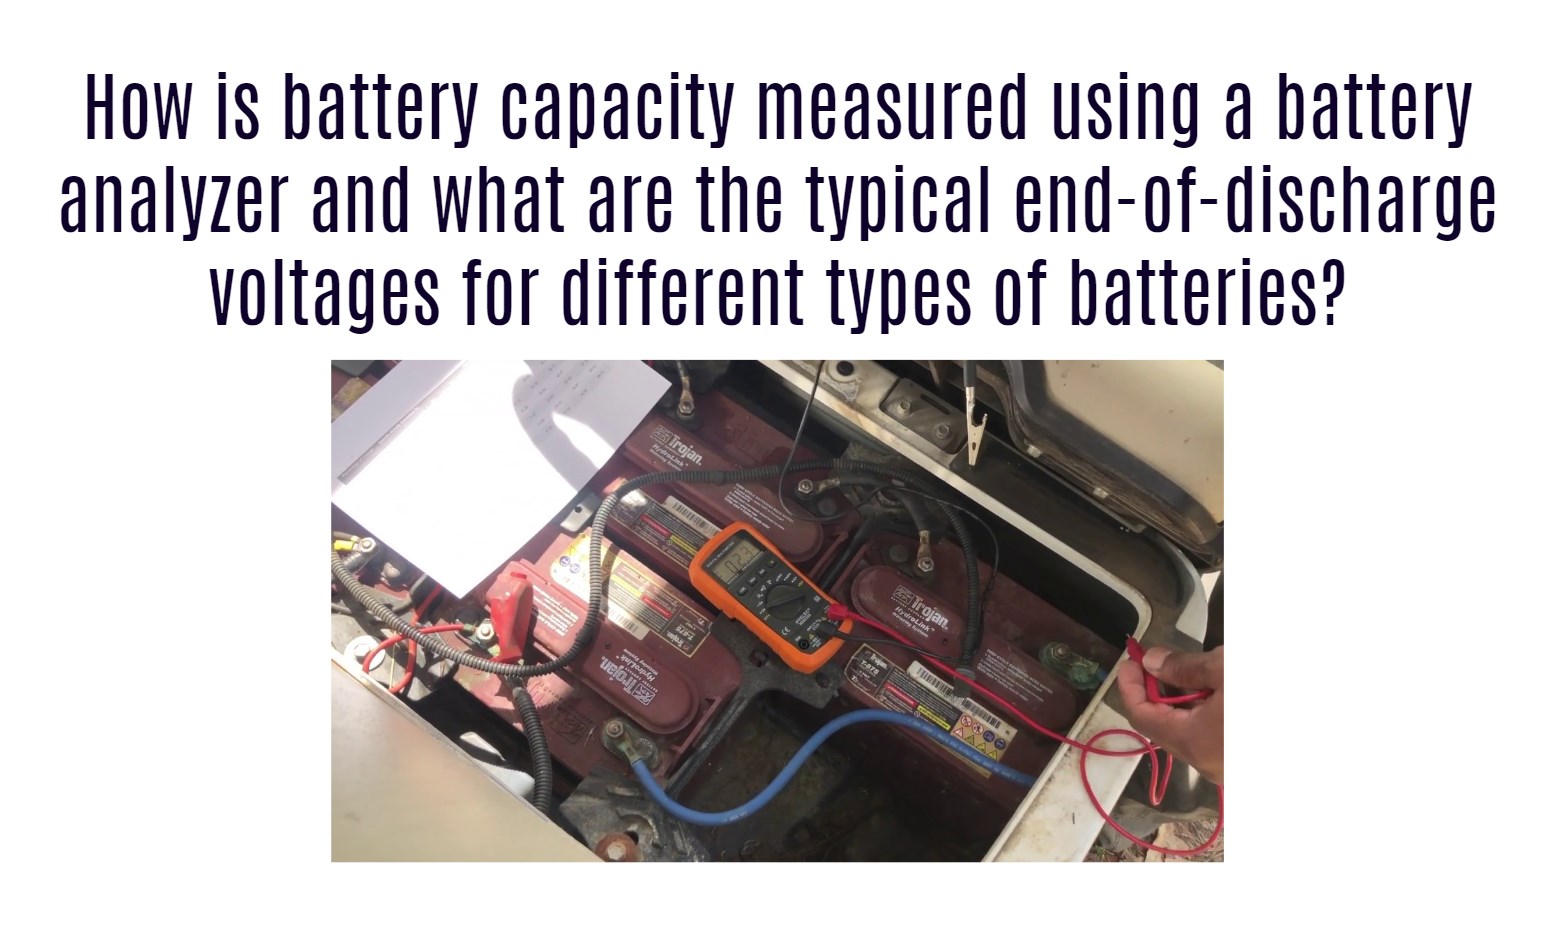 How is battery capacity measured using a battery analyzer and what are the typical end-of-discharge voltages for different types of batteries?